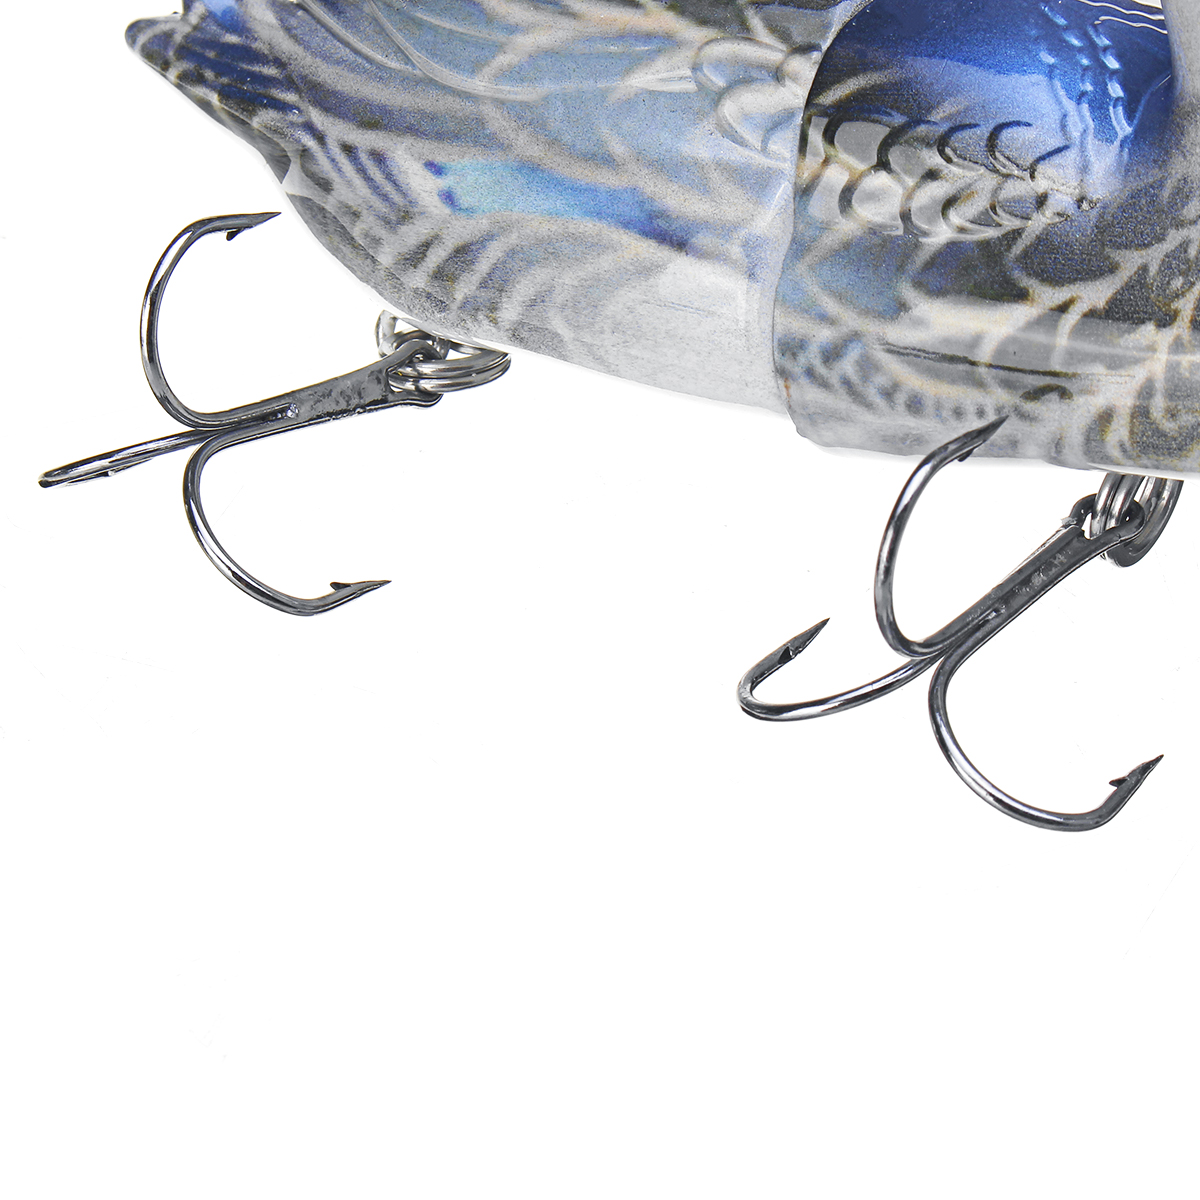 ZANLURE-1PC-15CM-90g-Floating-Duck-Shape-Fishing-Lure-With-Hook-Topwater-Soft-Bait-Fishing-Tackle-1648972-8